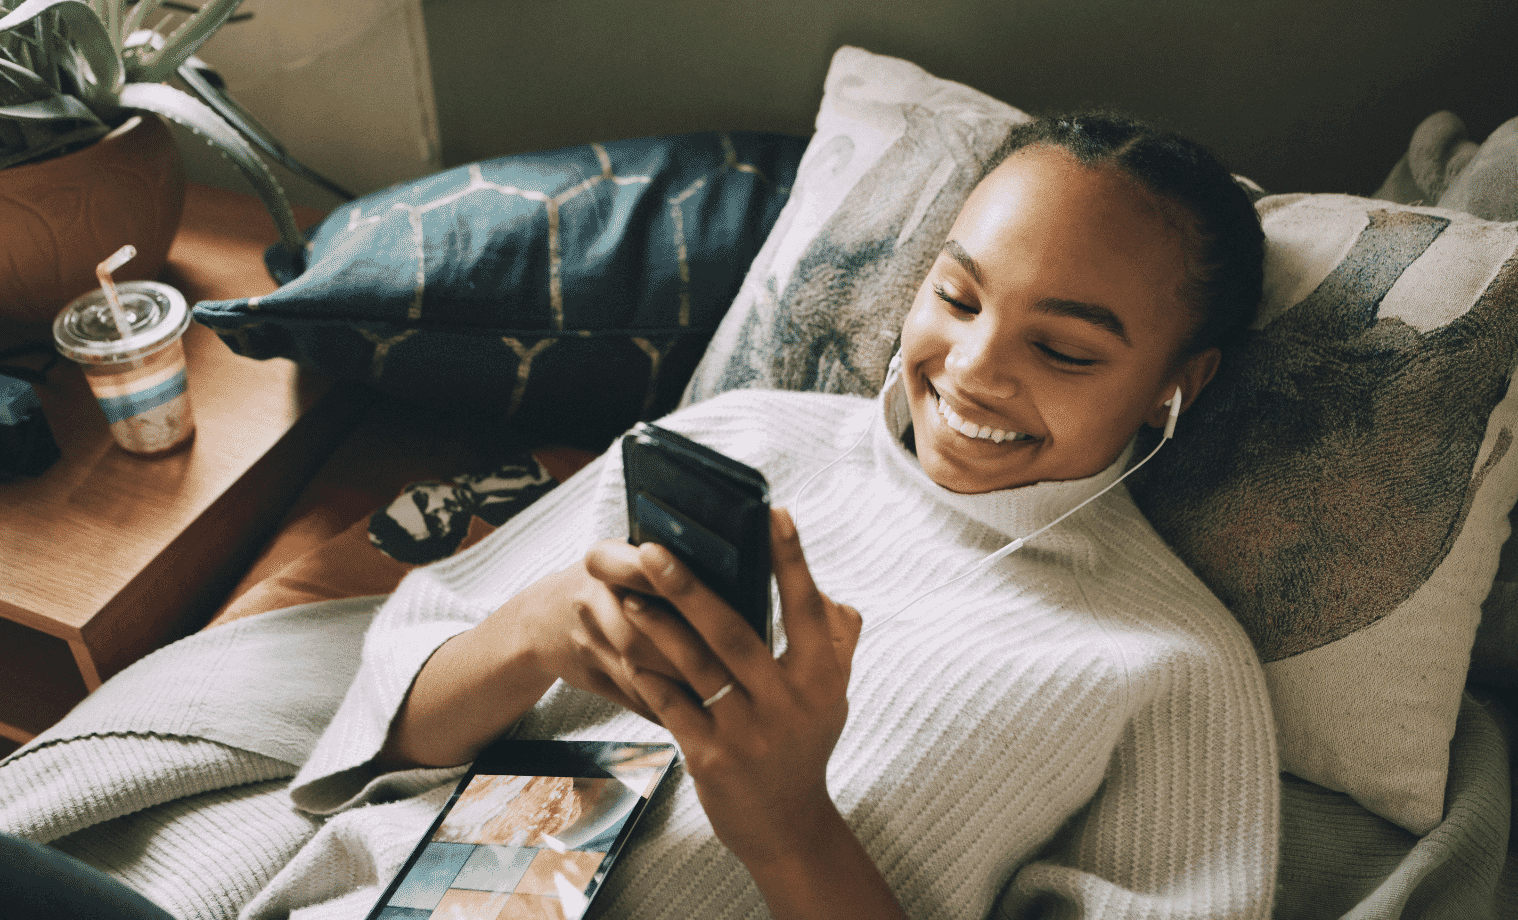 A teenage girl uses her mobile device while in bed at home